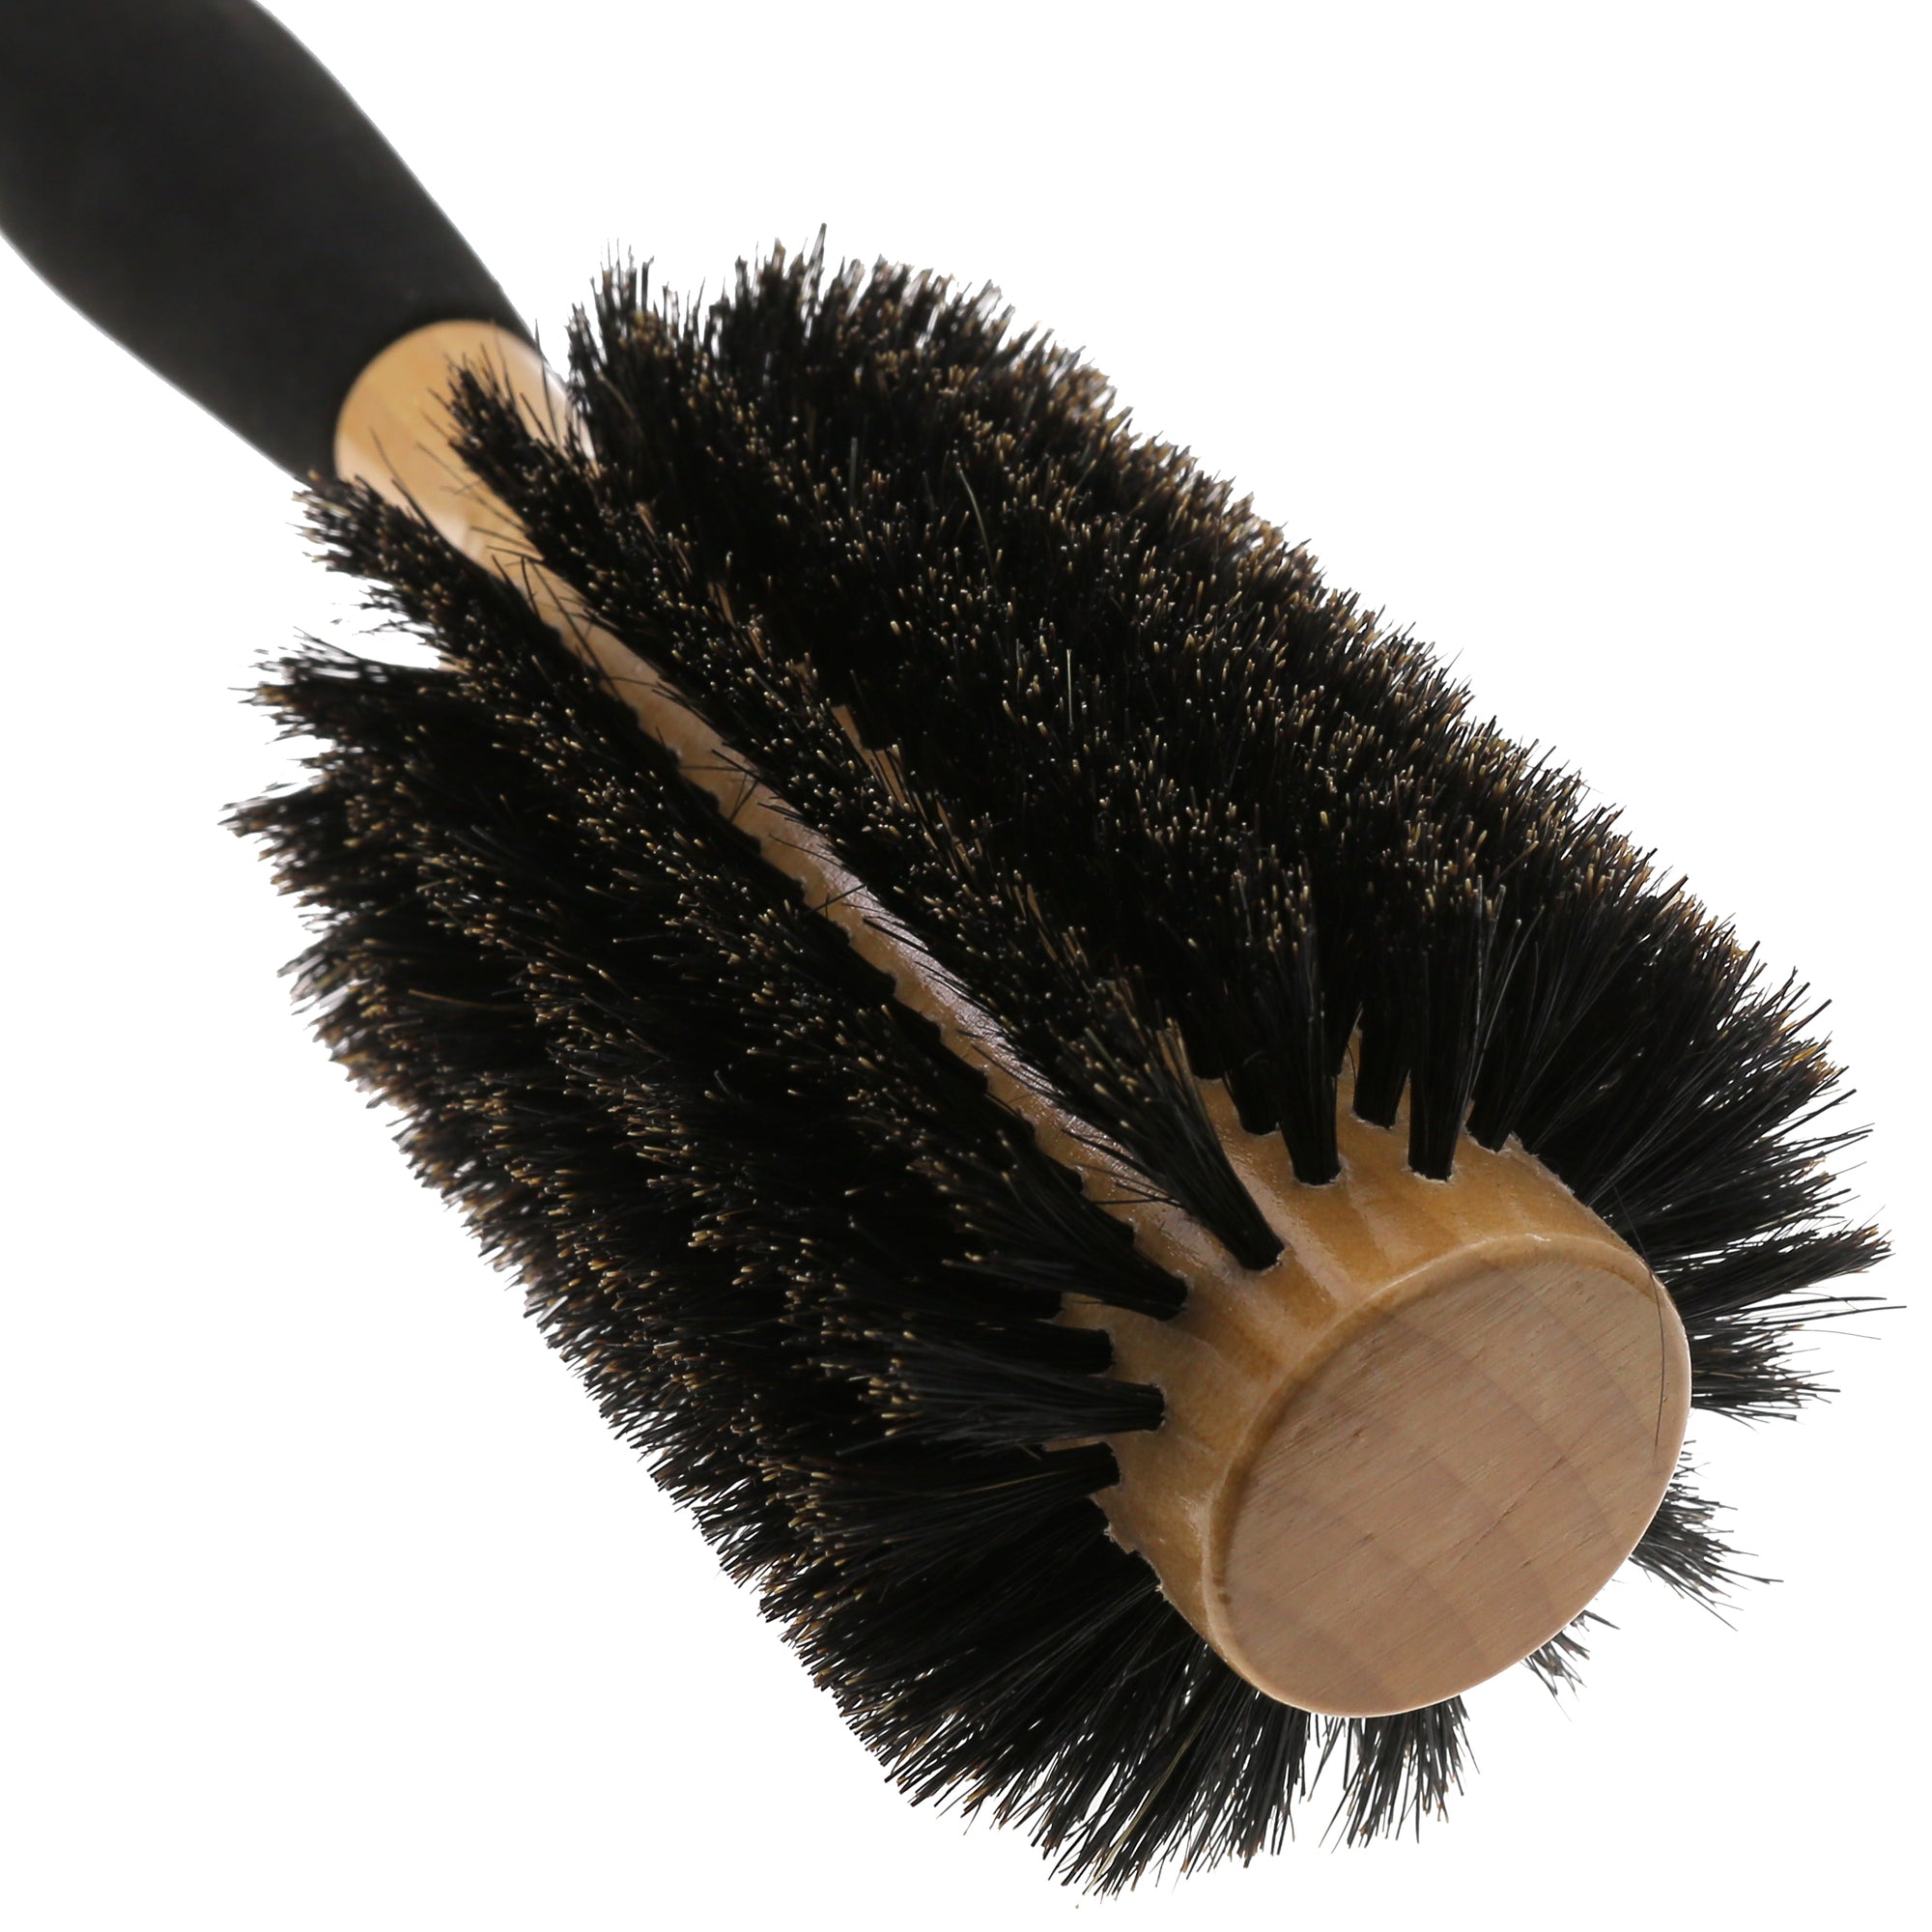 Pro Styling 3" Round Hair Brush with Foam Handle